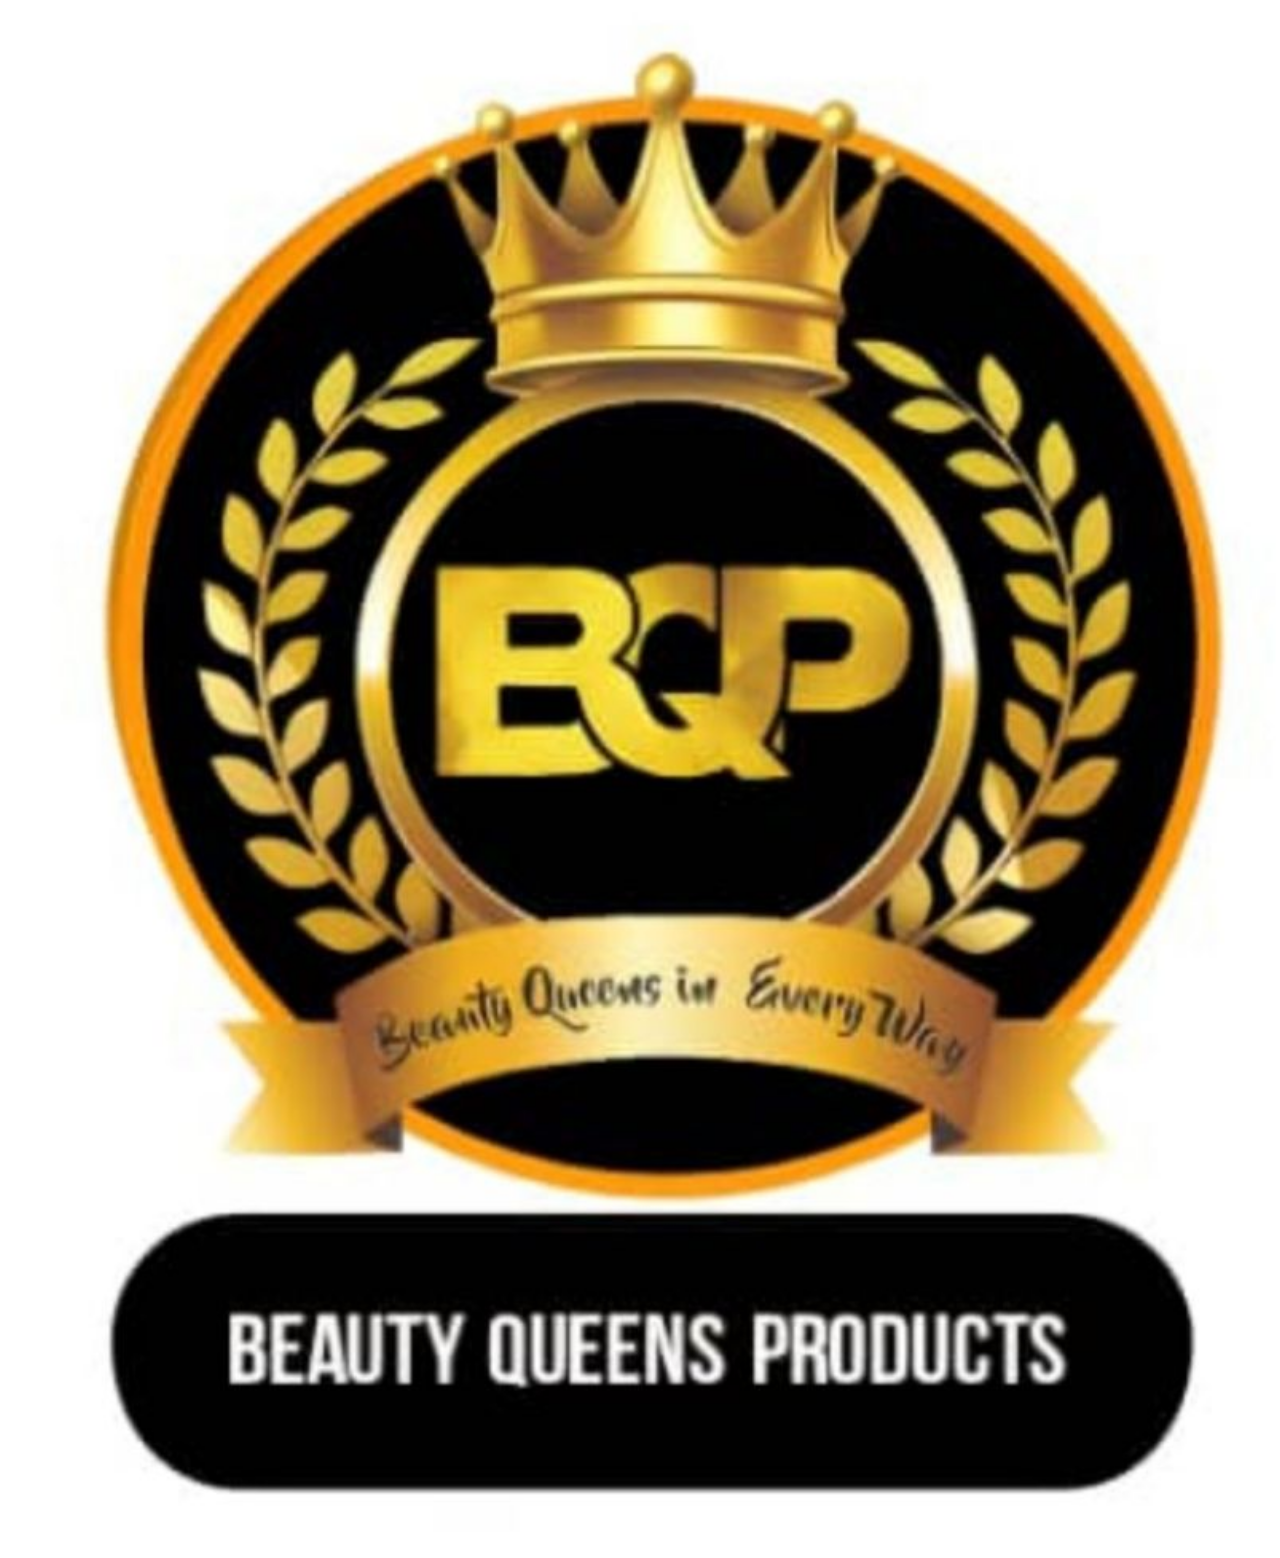  One  stop shop for skin and hair care products 's logo